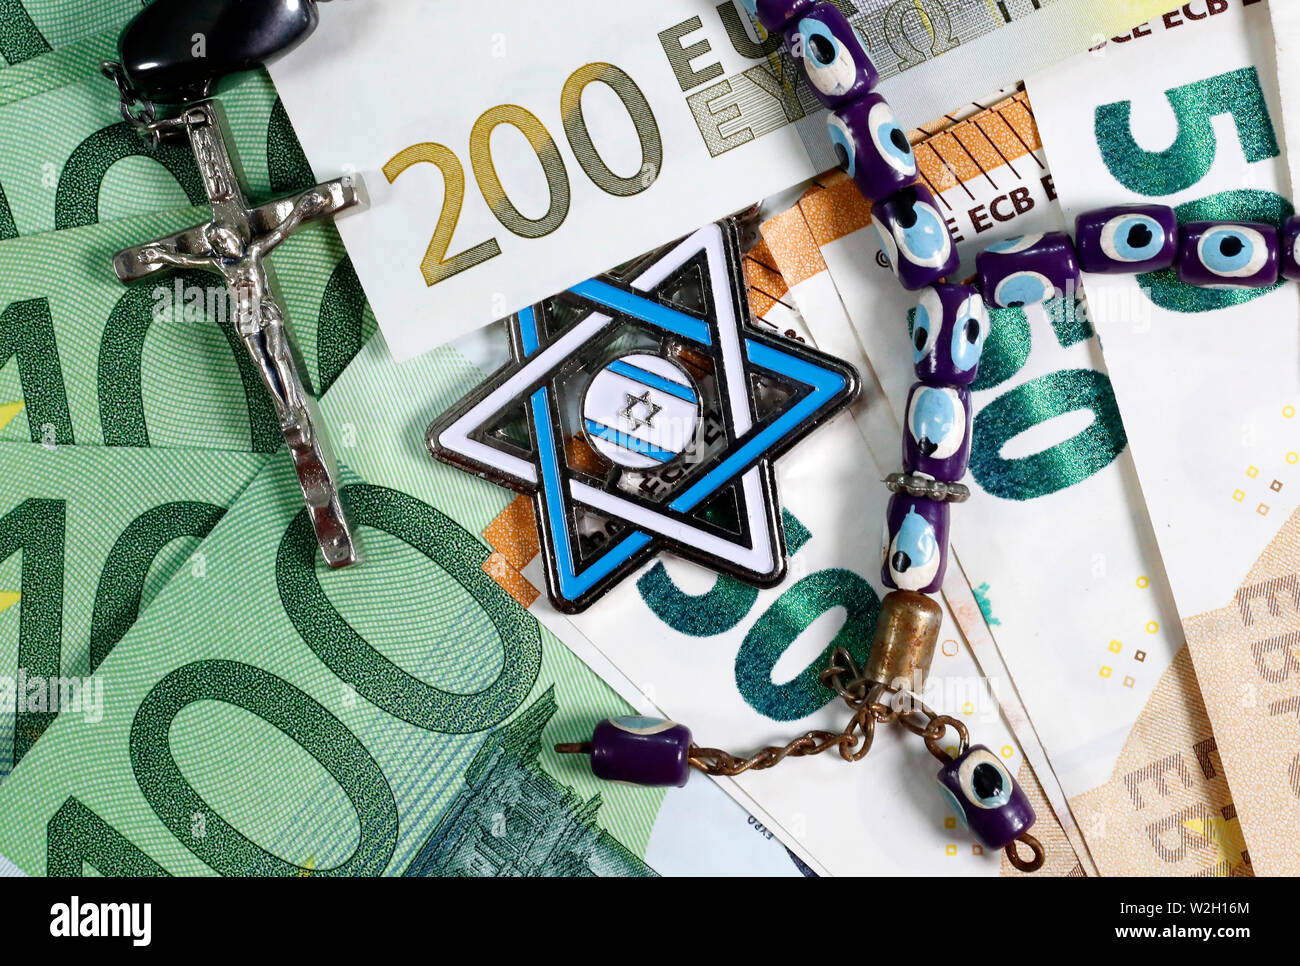 Banknotes of euro currency.  Christianity, Islamic and Judaism finance and economy concept with Jewish Star, Prayer Beads and Crucifix. Interreligious Stock Photo